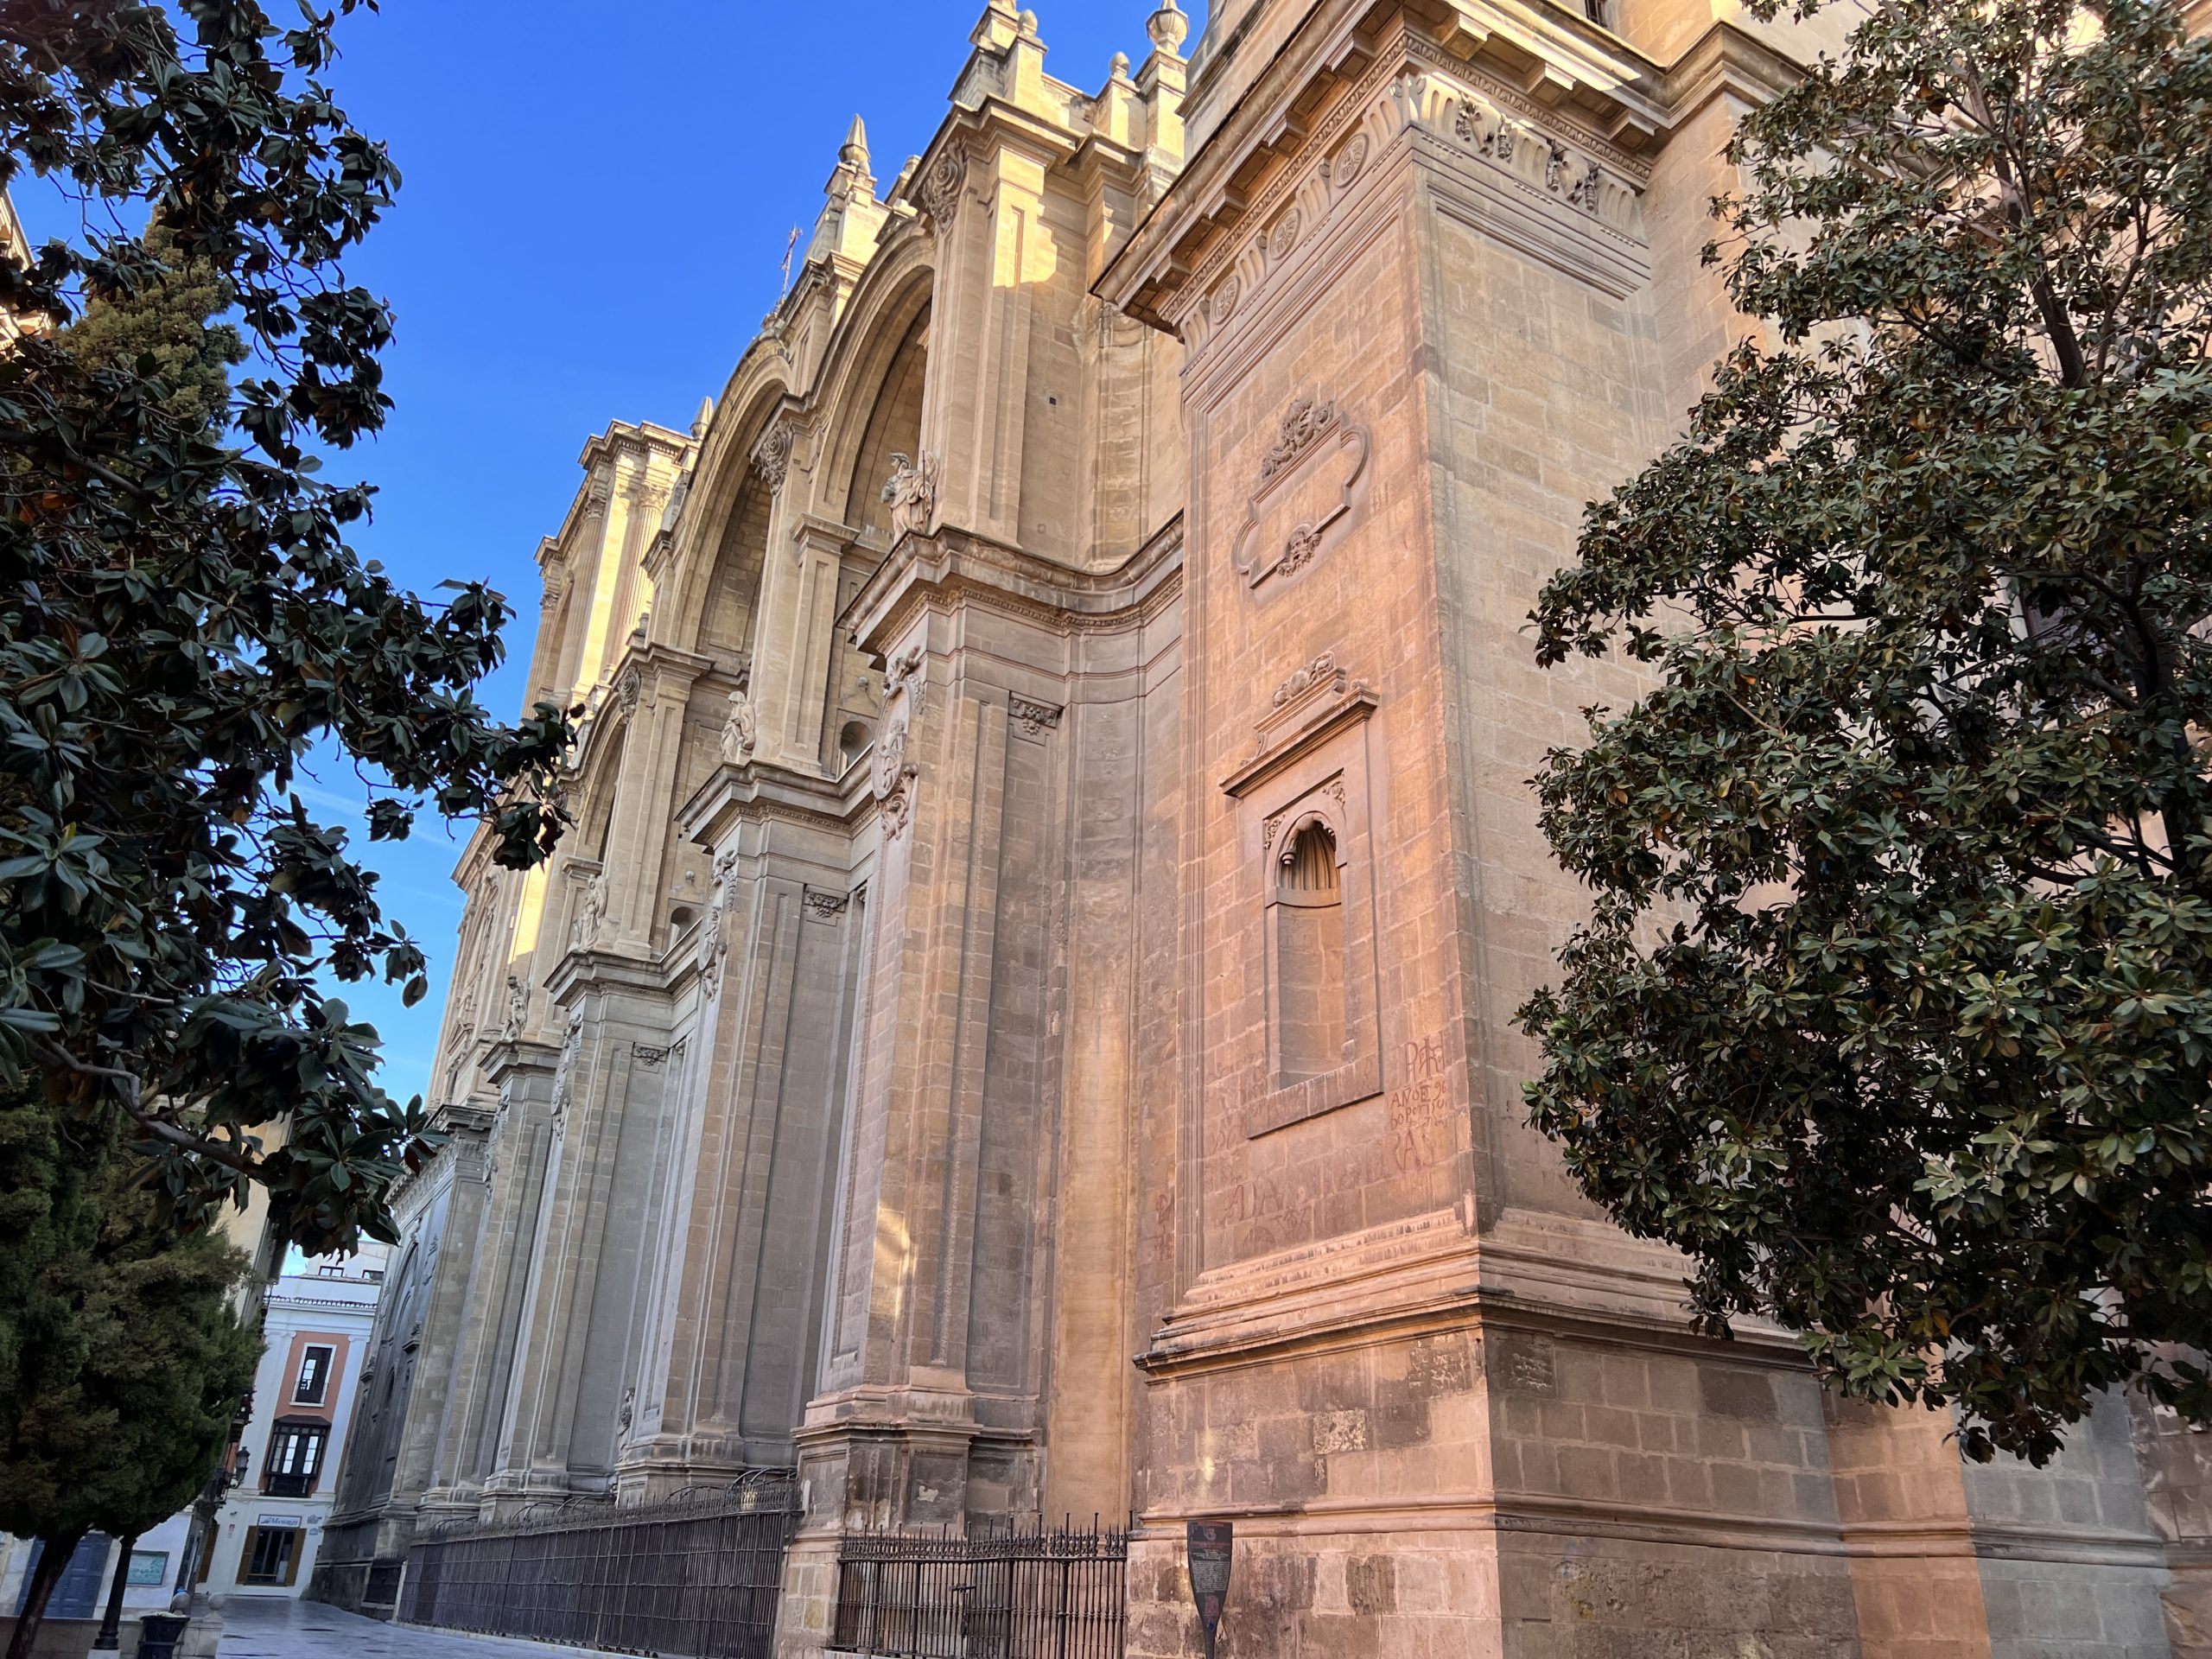 Views of the front of the Granada Cathedral